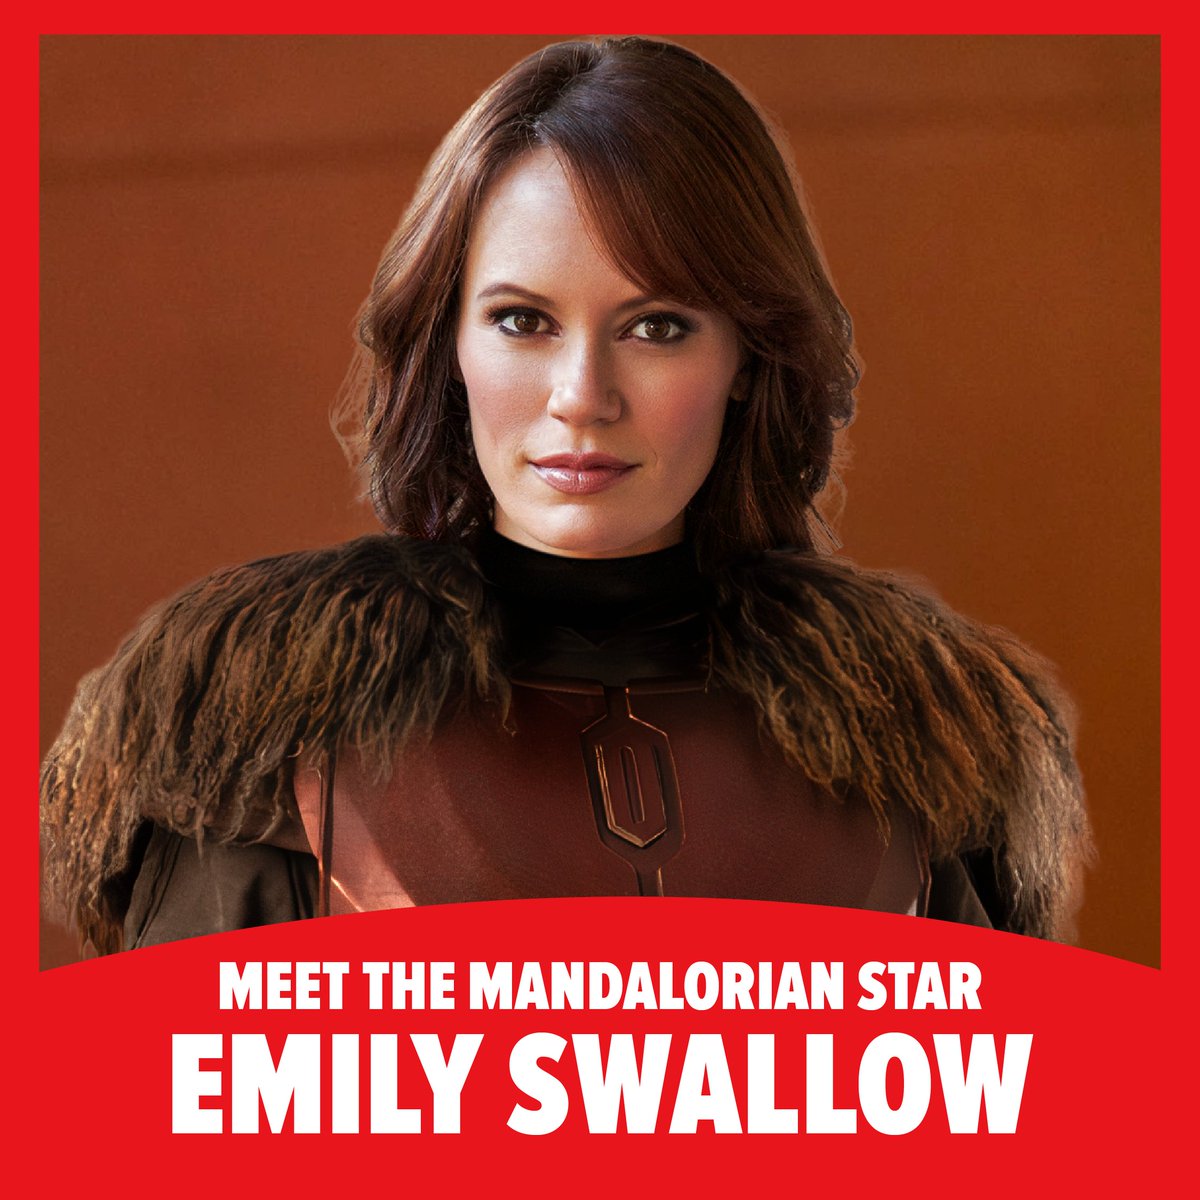 Light the forge, the Armorer is on her way. Meet Emily Swallow from the Mandalorian at FAN EXPO Canada this August. Get your tickets now. spr.ly/6010jy4f6